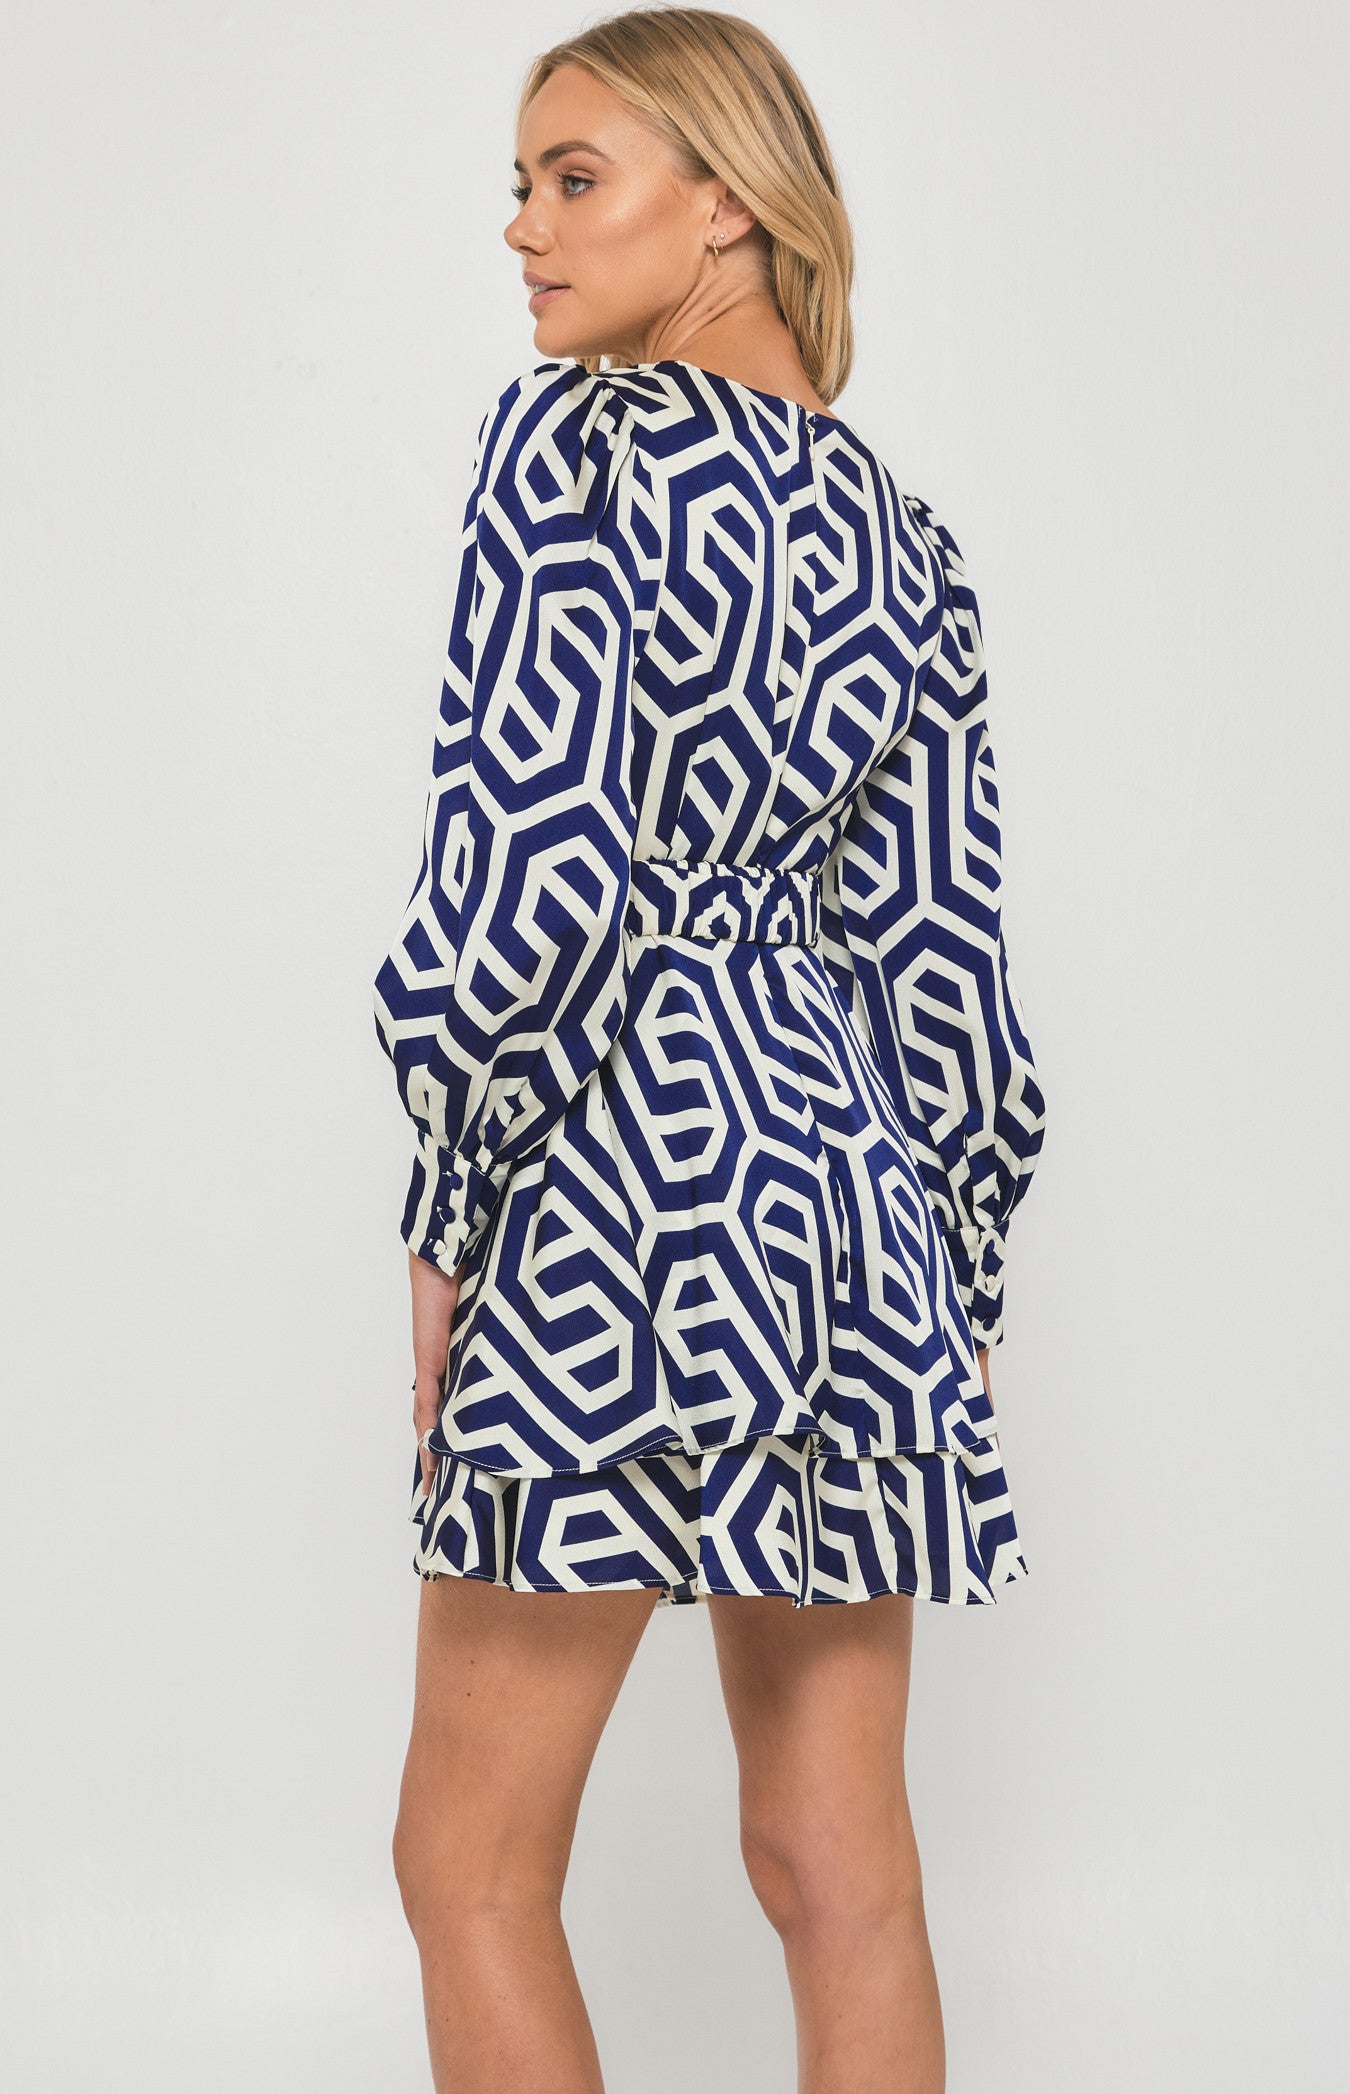 STYLE STATE GEOMETRIC PRINT DRESS WITH METAL BUCKLE DETAIL BLUE